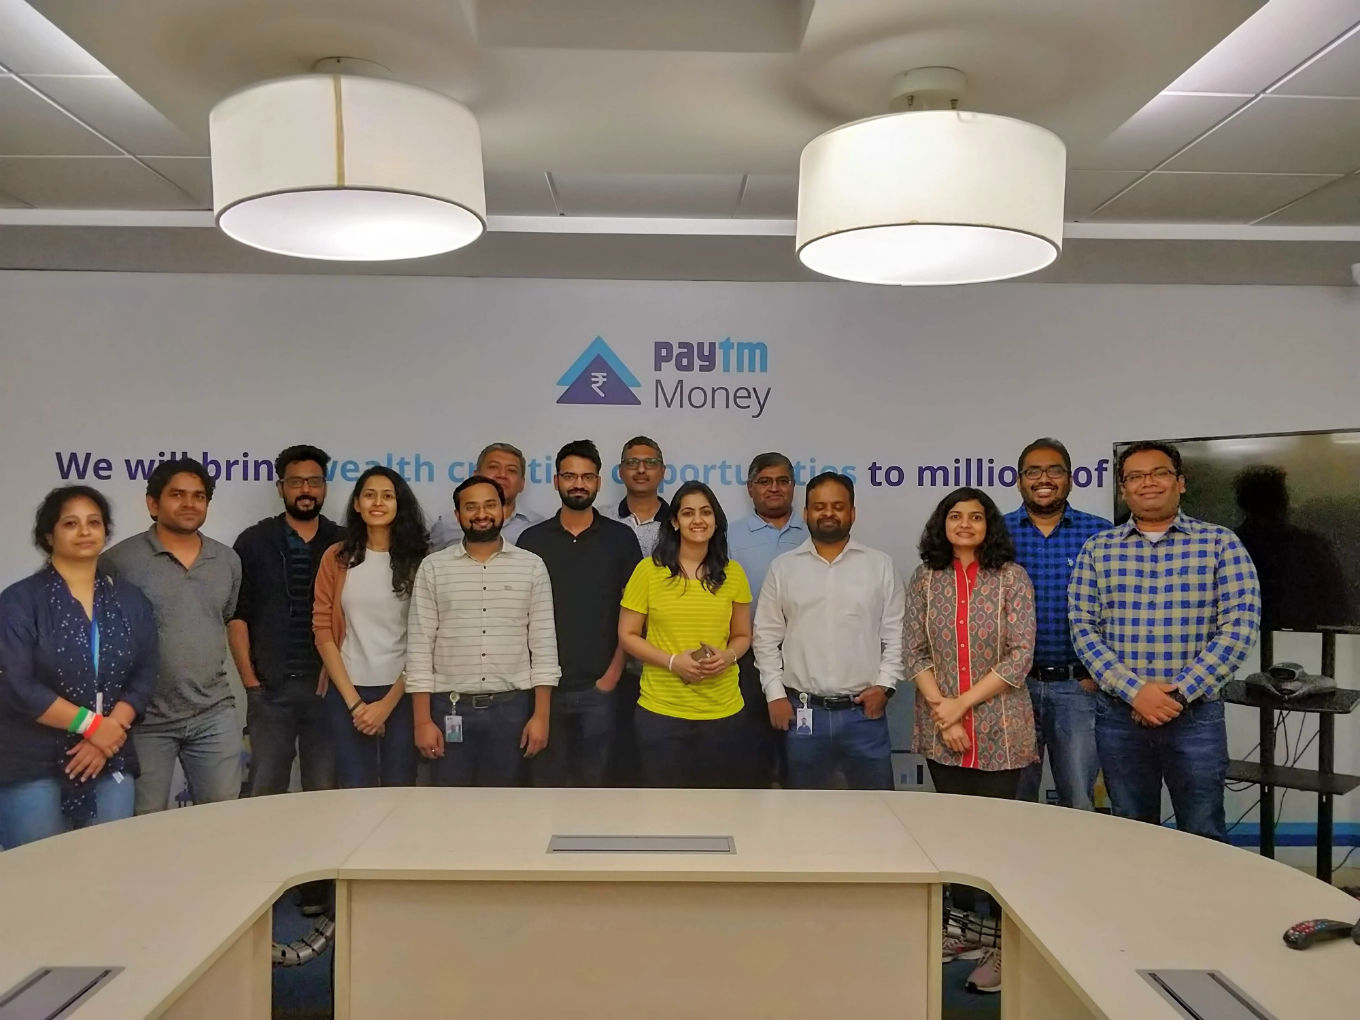 Inc42 UpNext: Can Paytm Money Be The ‘AWS’ For Paytm Amid Losses?